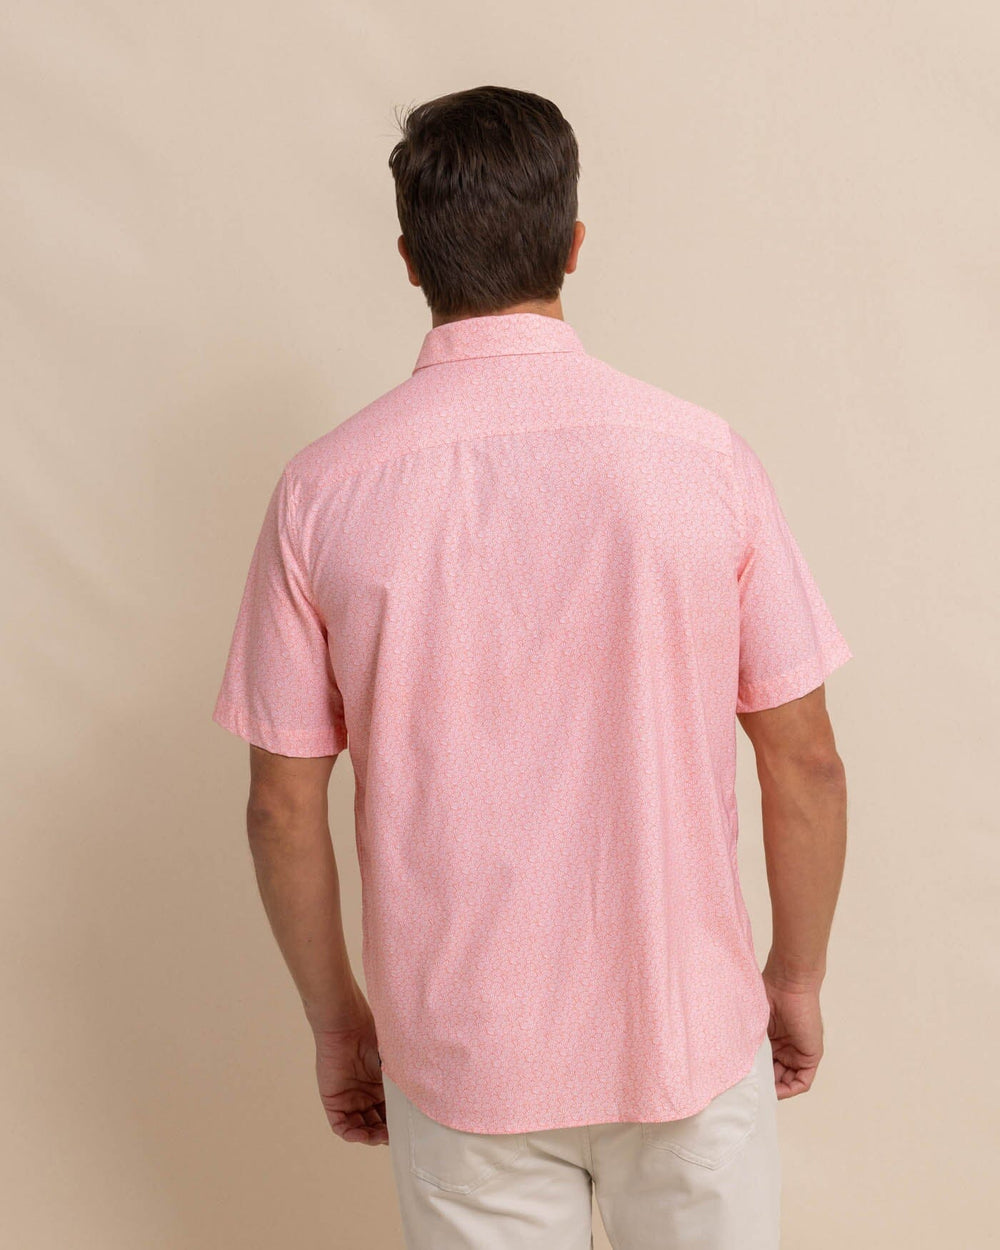 The back view of the Southern Tide brrr Intercoastal What the Shell Short Sleeve Sportshirt by Southern Tide - Conch Shell